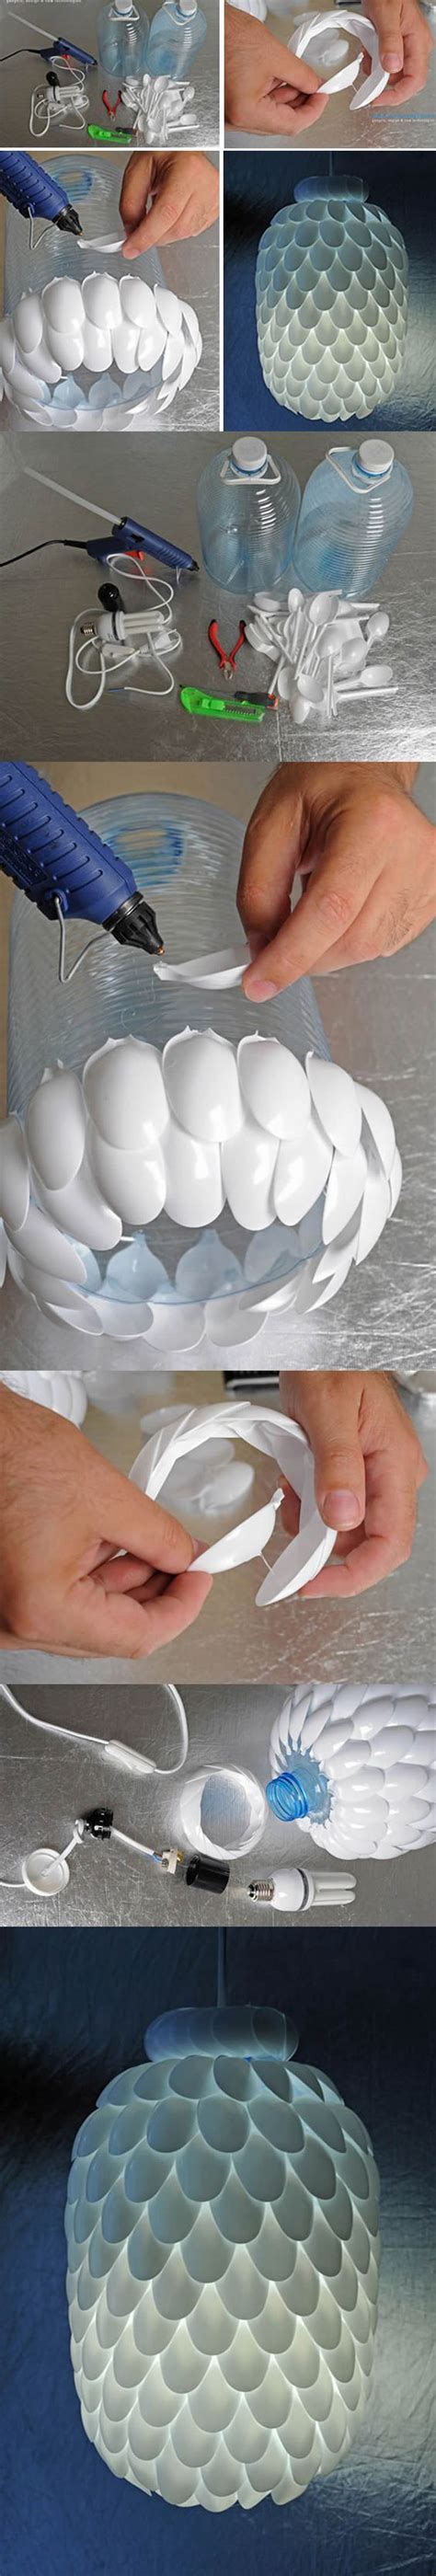 Diy Amazing Plastic Spoon Crafts That Will Fascinate You Feelitcool